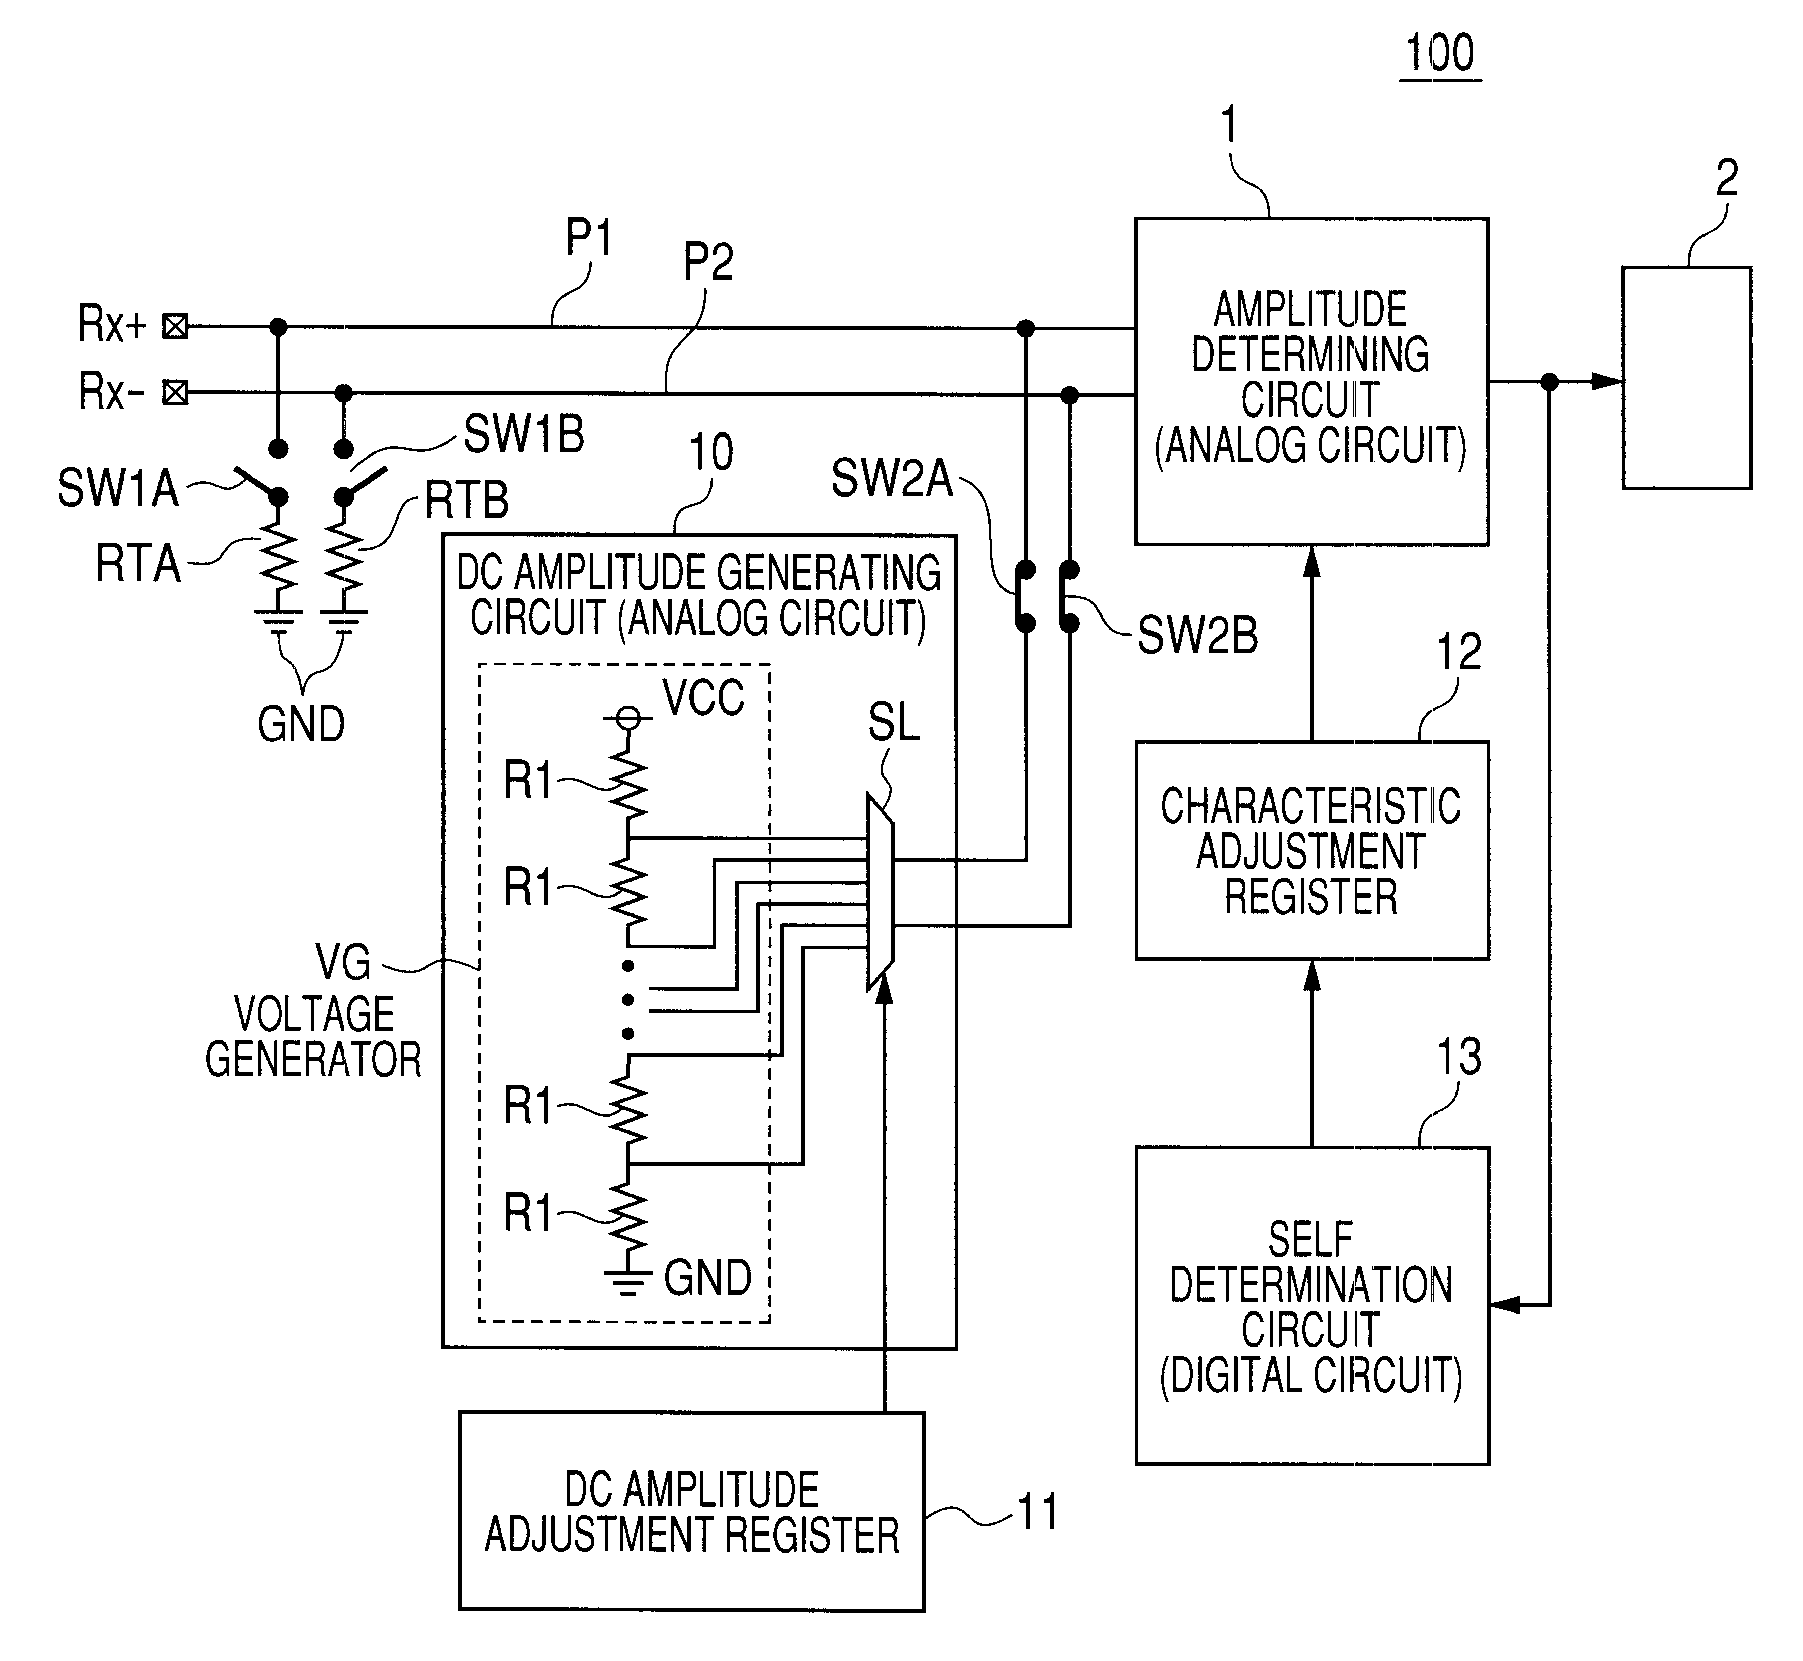 Oob (out of band) detection circuit and serial ata system